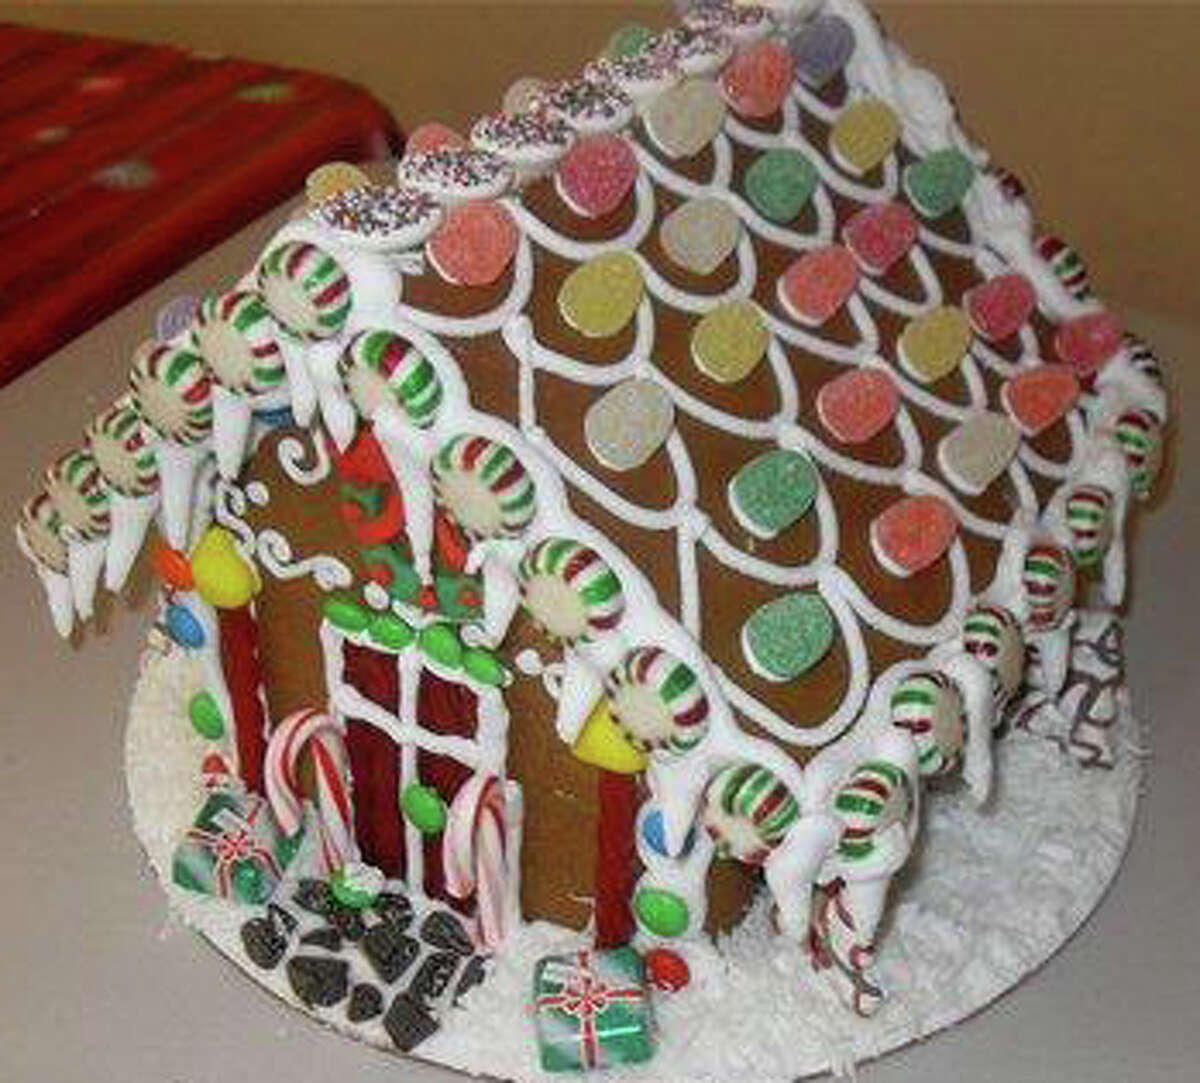 Sweet Cakes in Fairfield offers gingerbread house decorating classes.